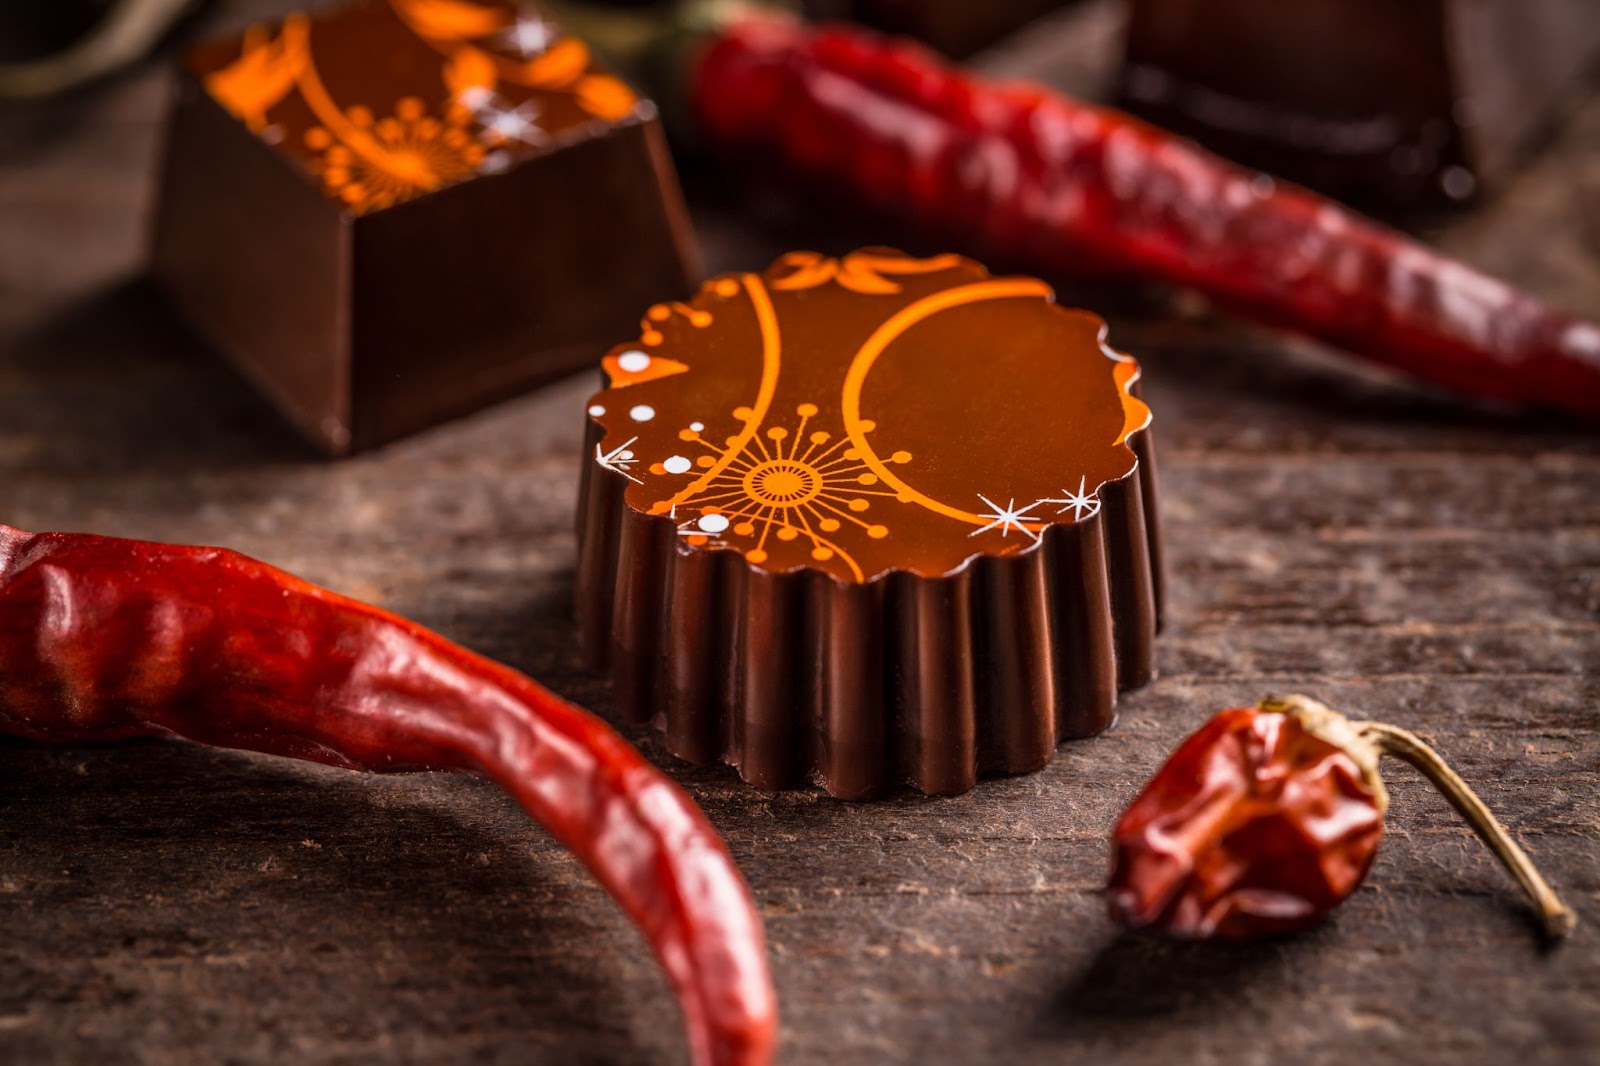 Chili-infused Mexican truffle chocolates surrounded by vibrant red chili peppers, highlighting the spicy essence infused in